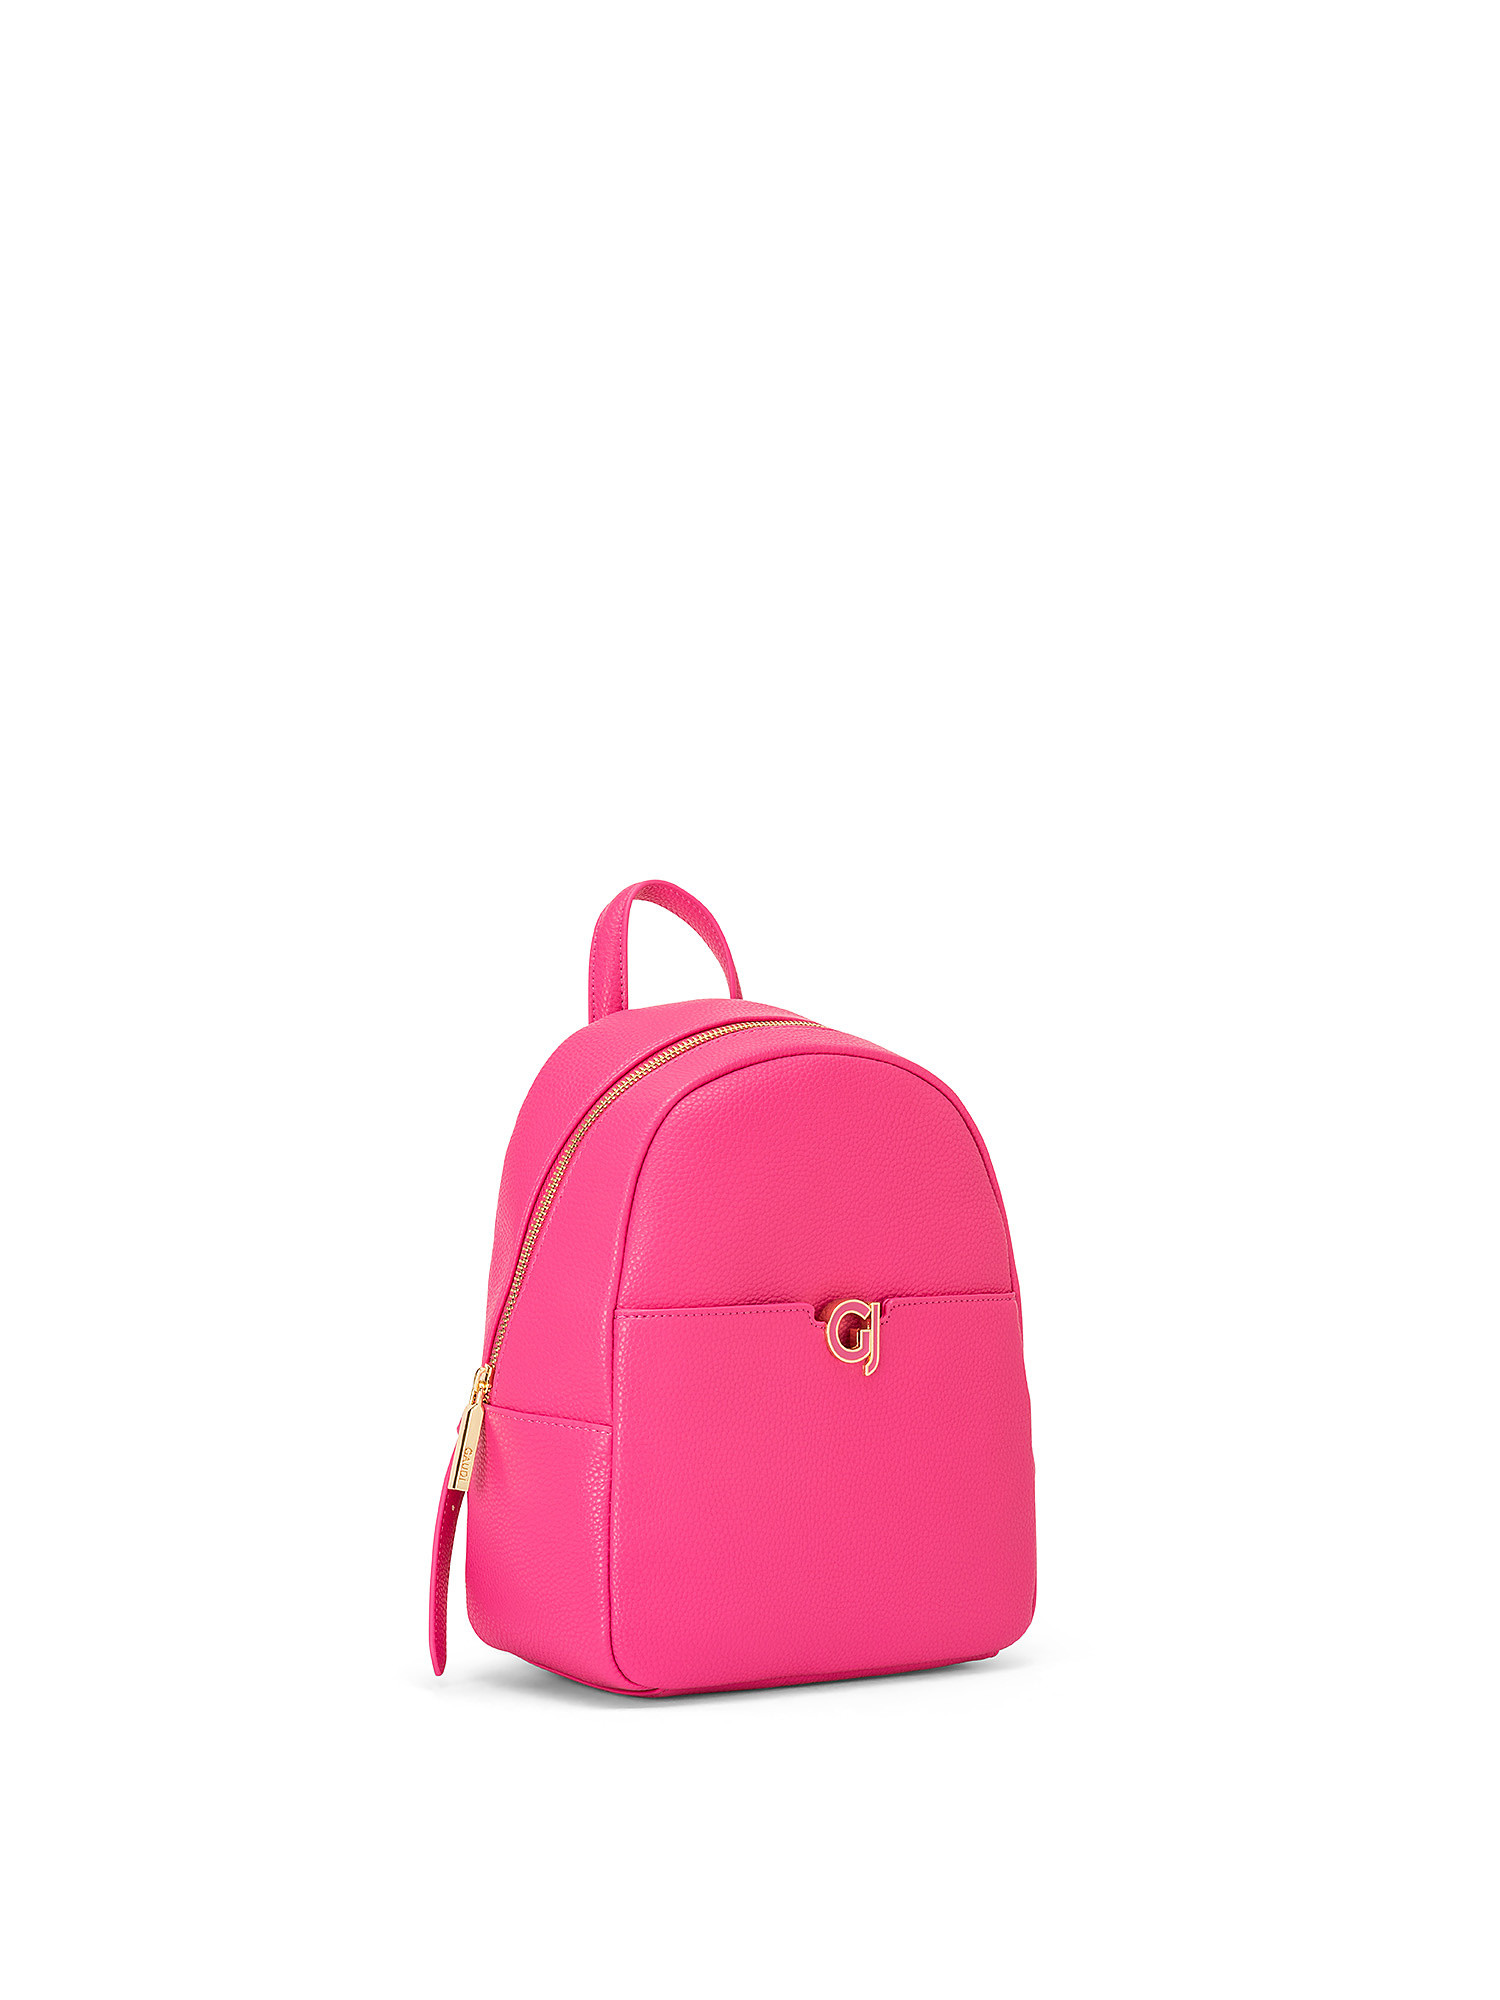 Sapphire backpack, Pink Fuchsia, large image number 1